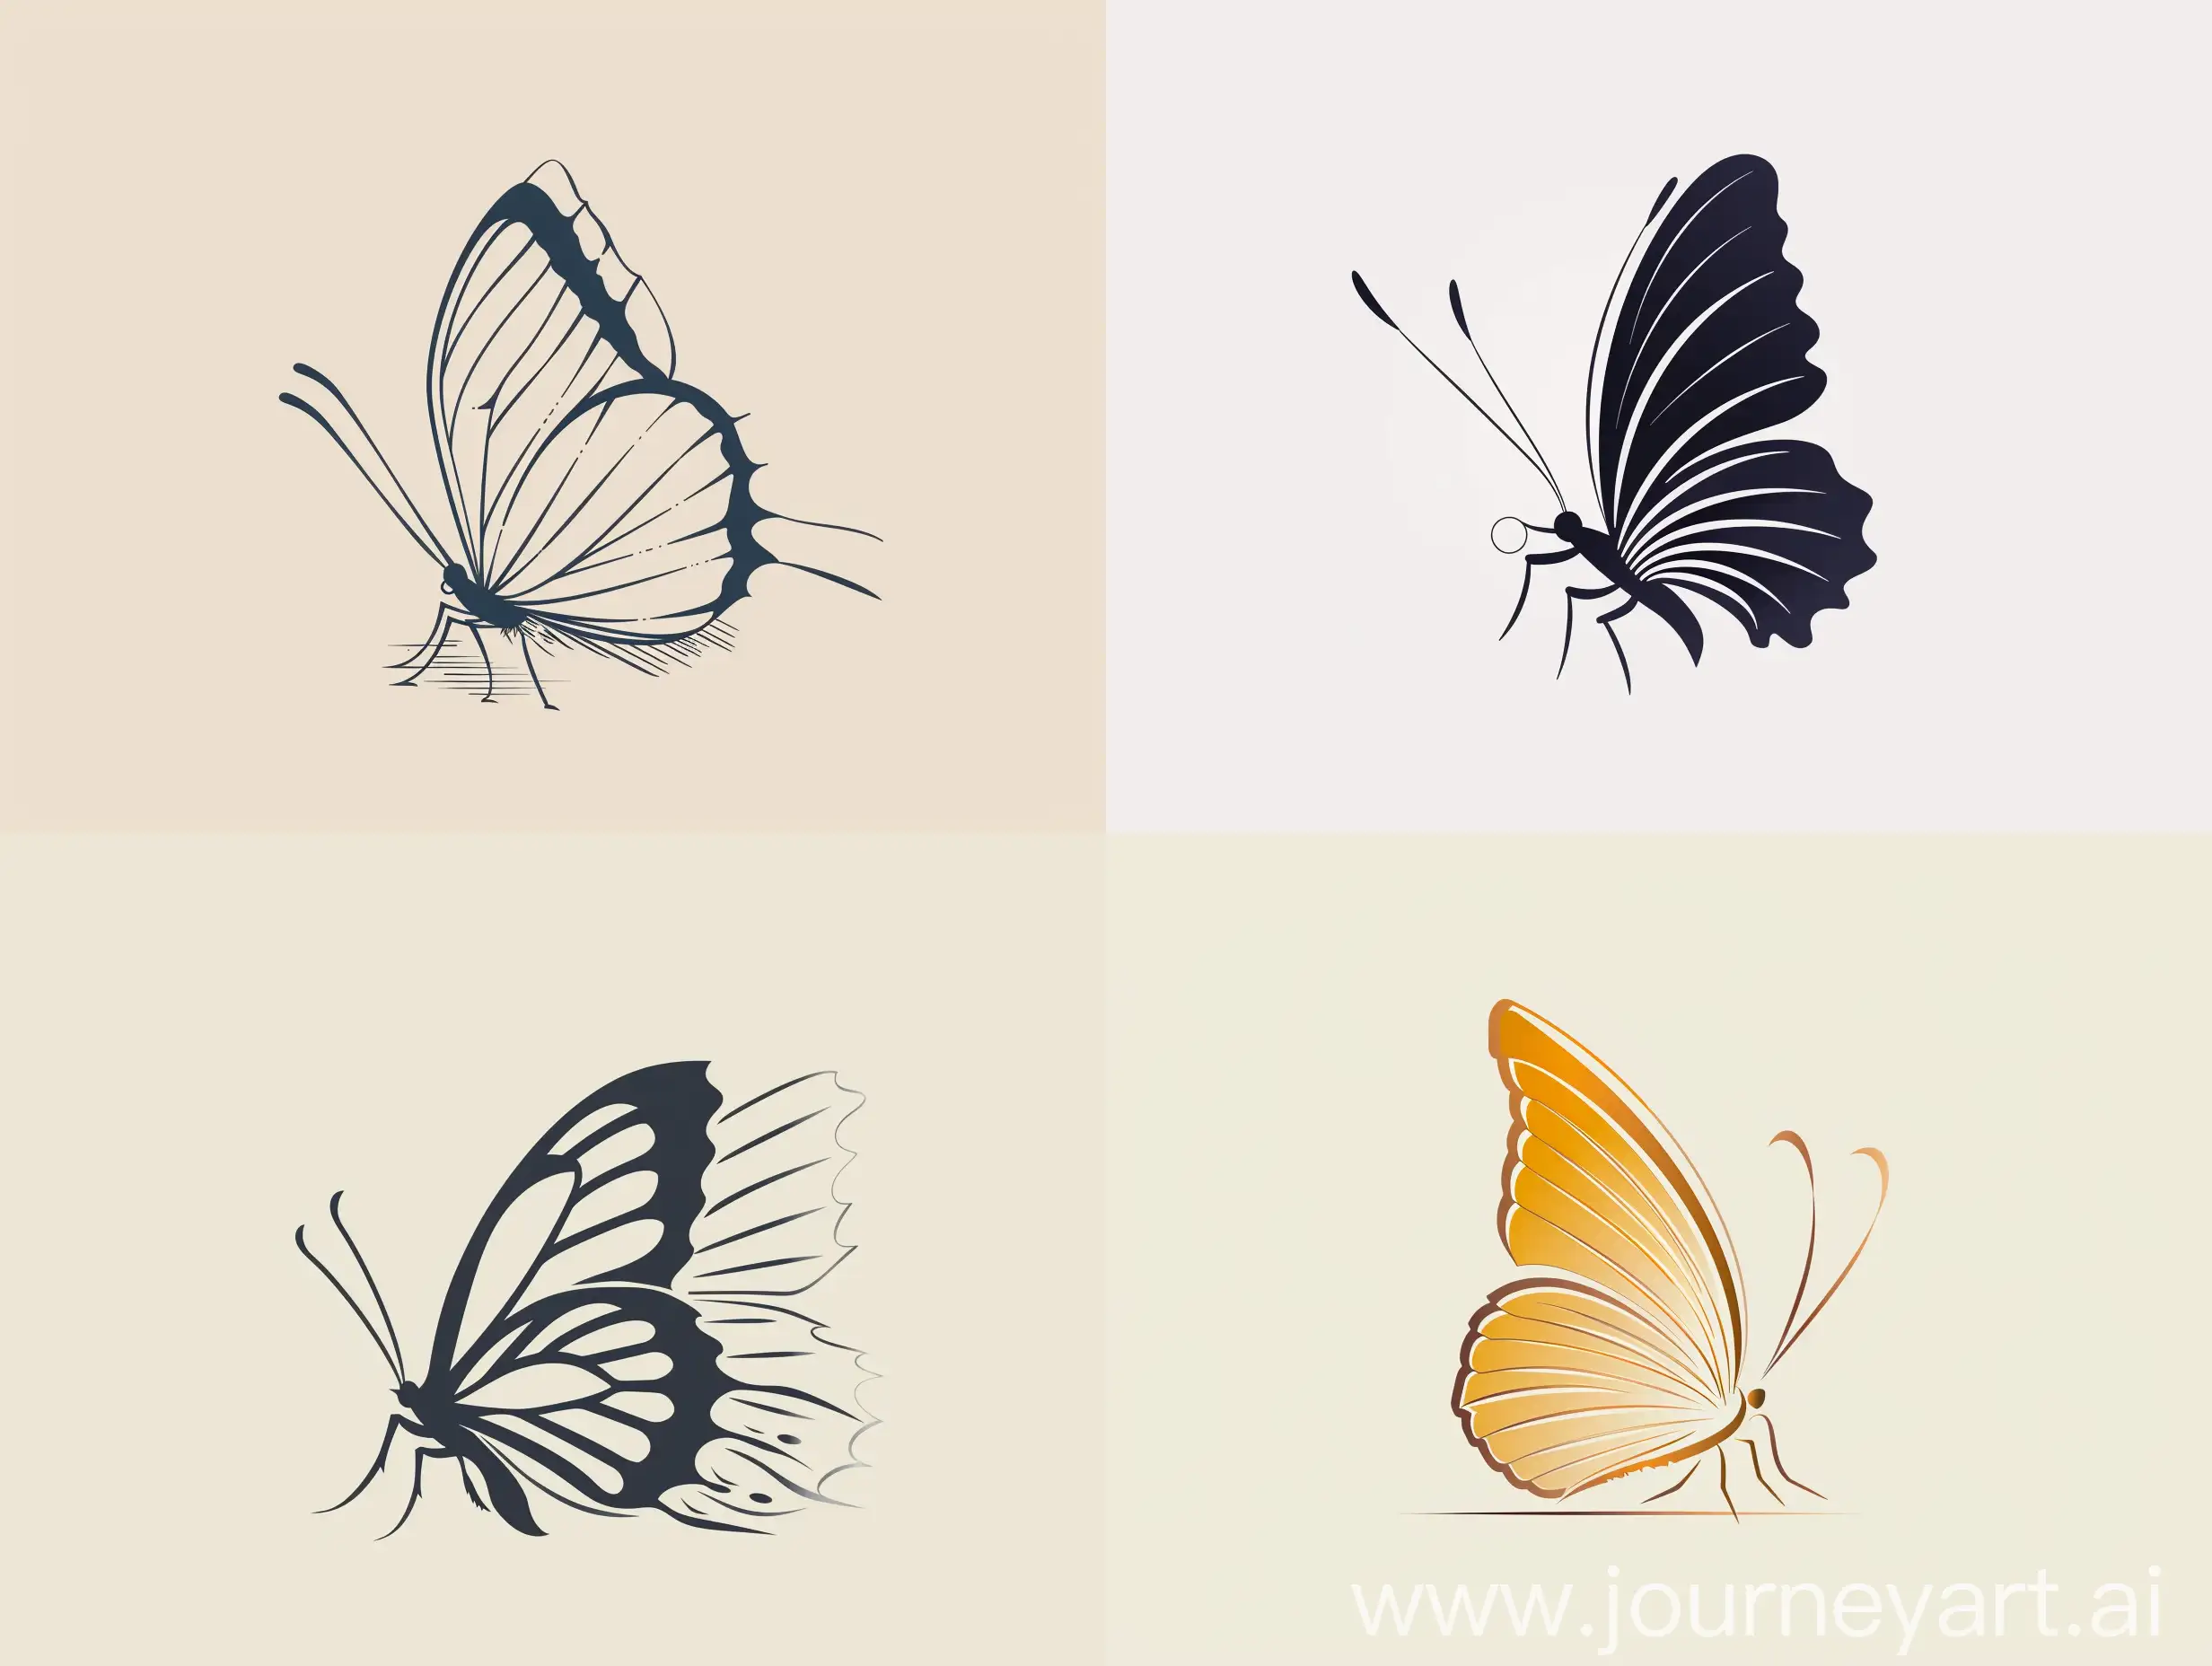 Minimalistic-Calligraphic-Butterfly-Logo-in-Neat-Lines